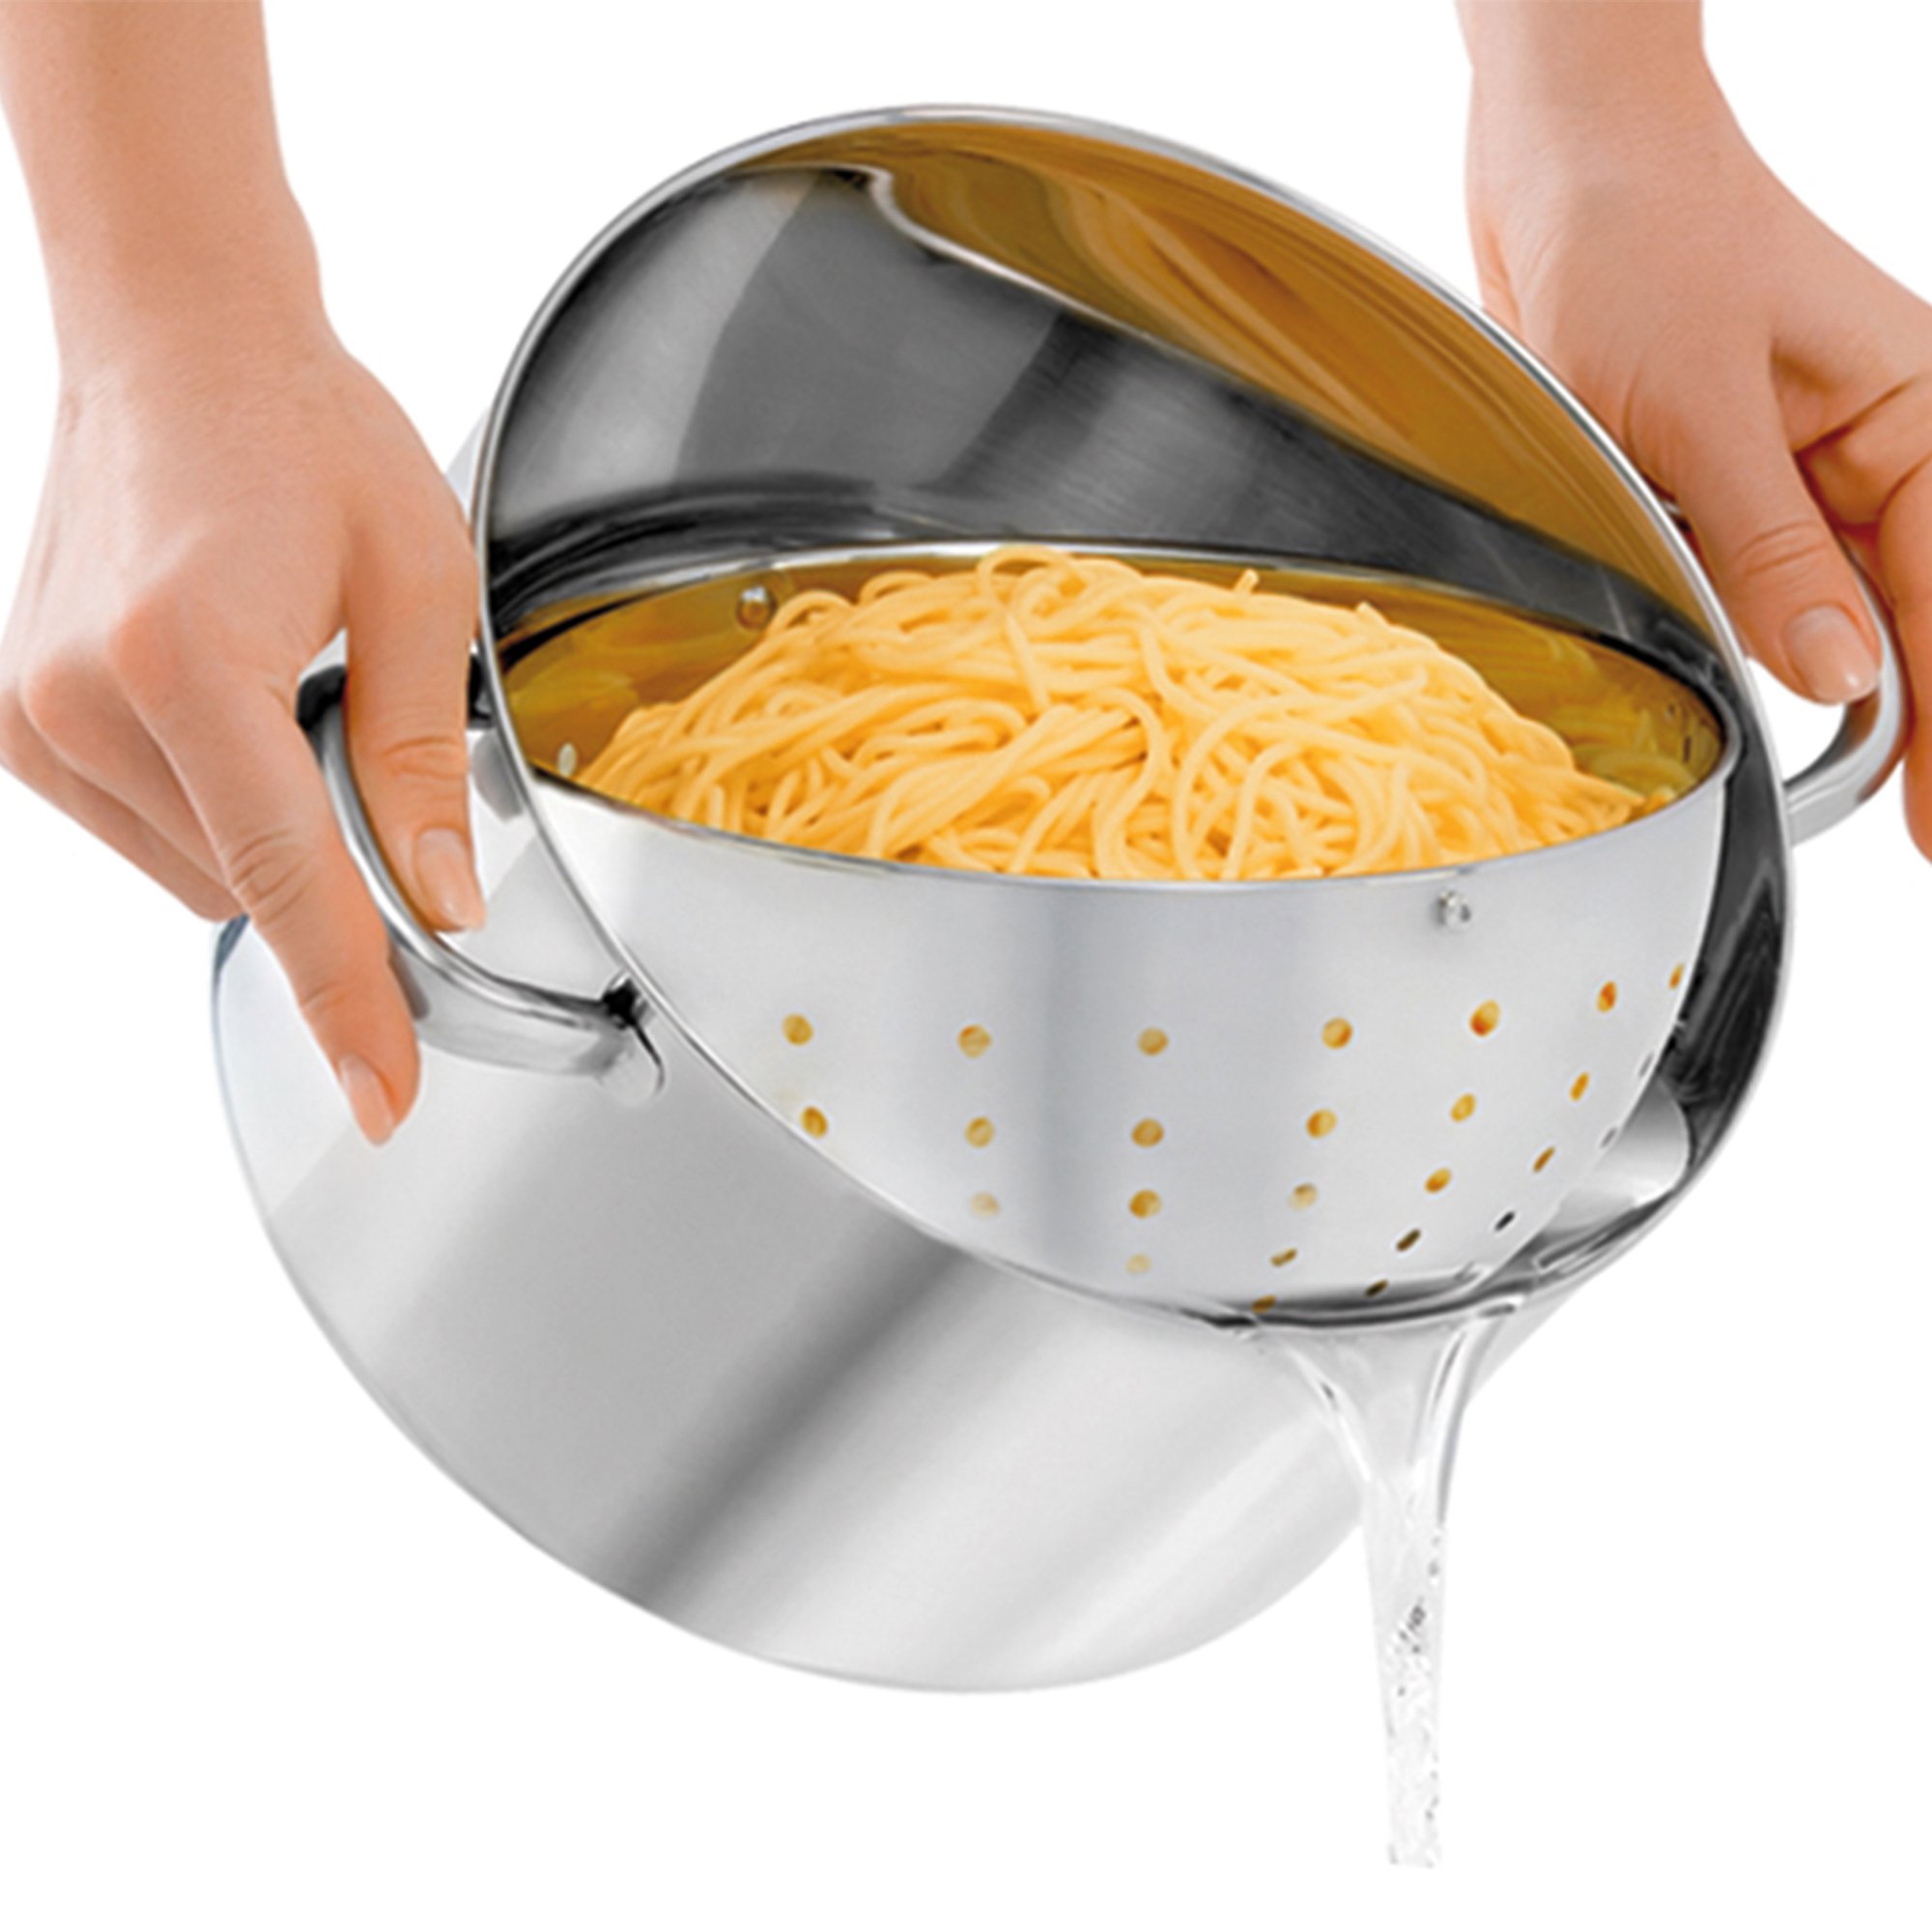 BEYOND® Stainless steel pasta pot 24 cm, frying pot with glass lid and removable strainer insert, induction